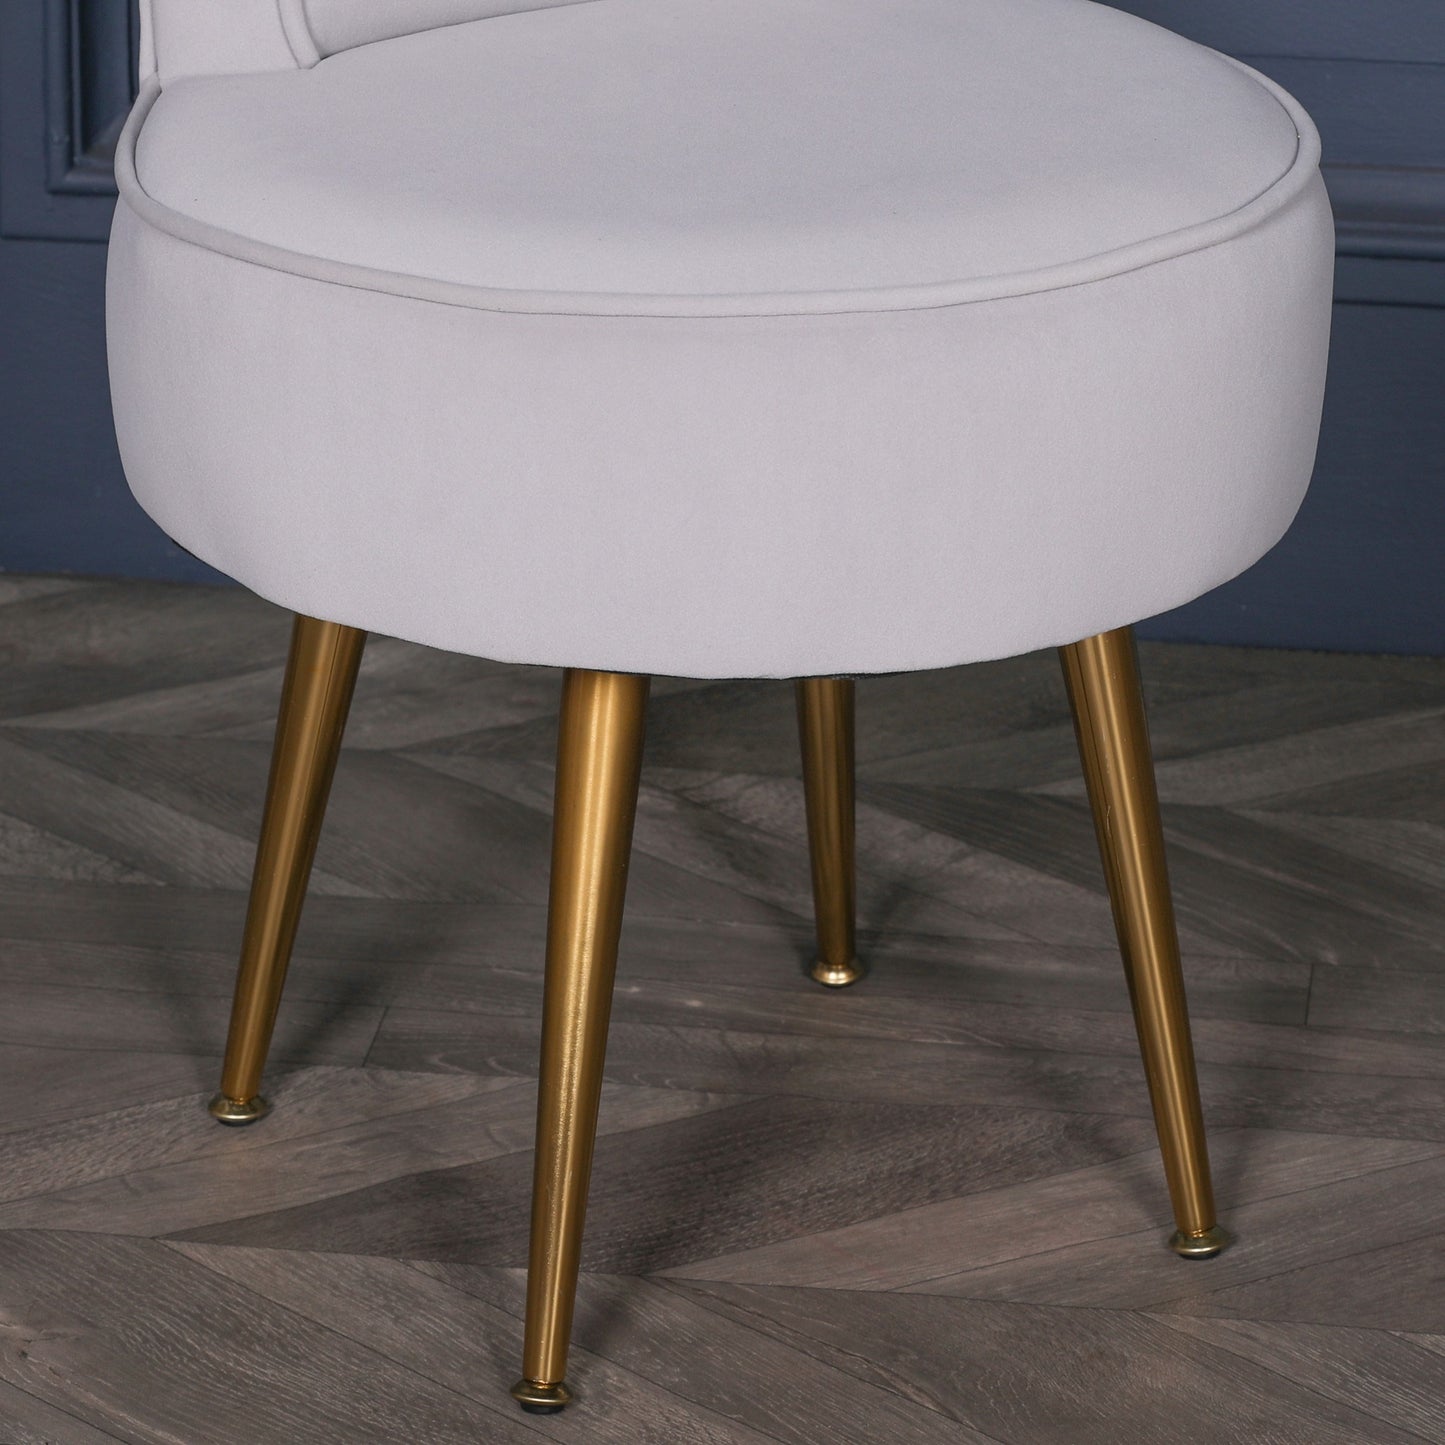 Grey Stool / Bedroom Chair with Gold Legs CasaFenix